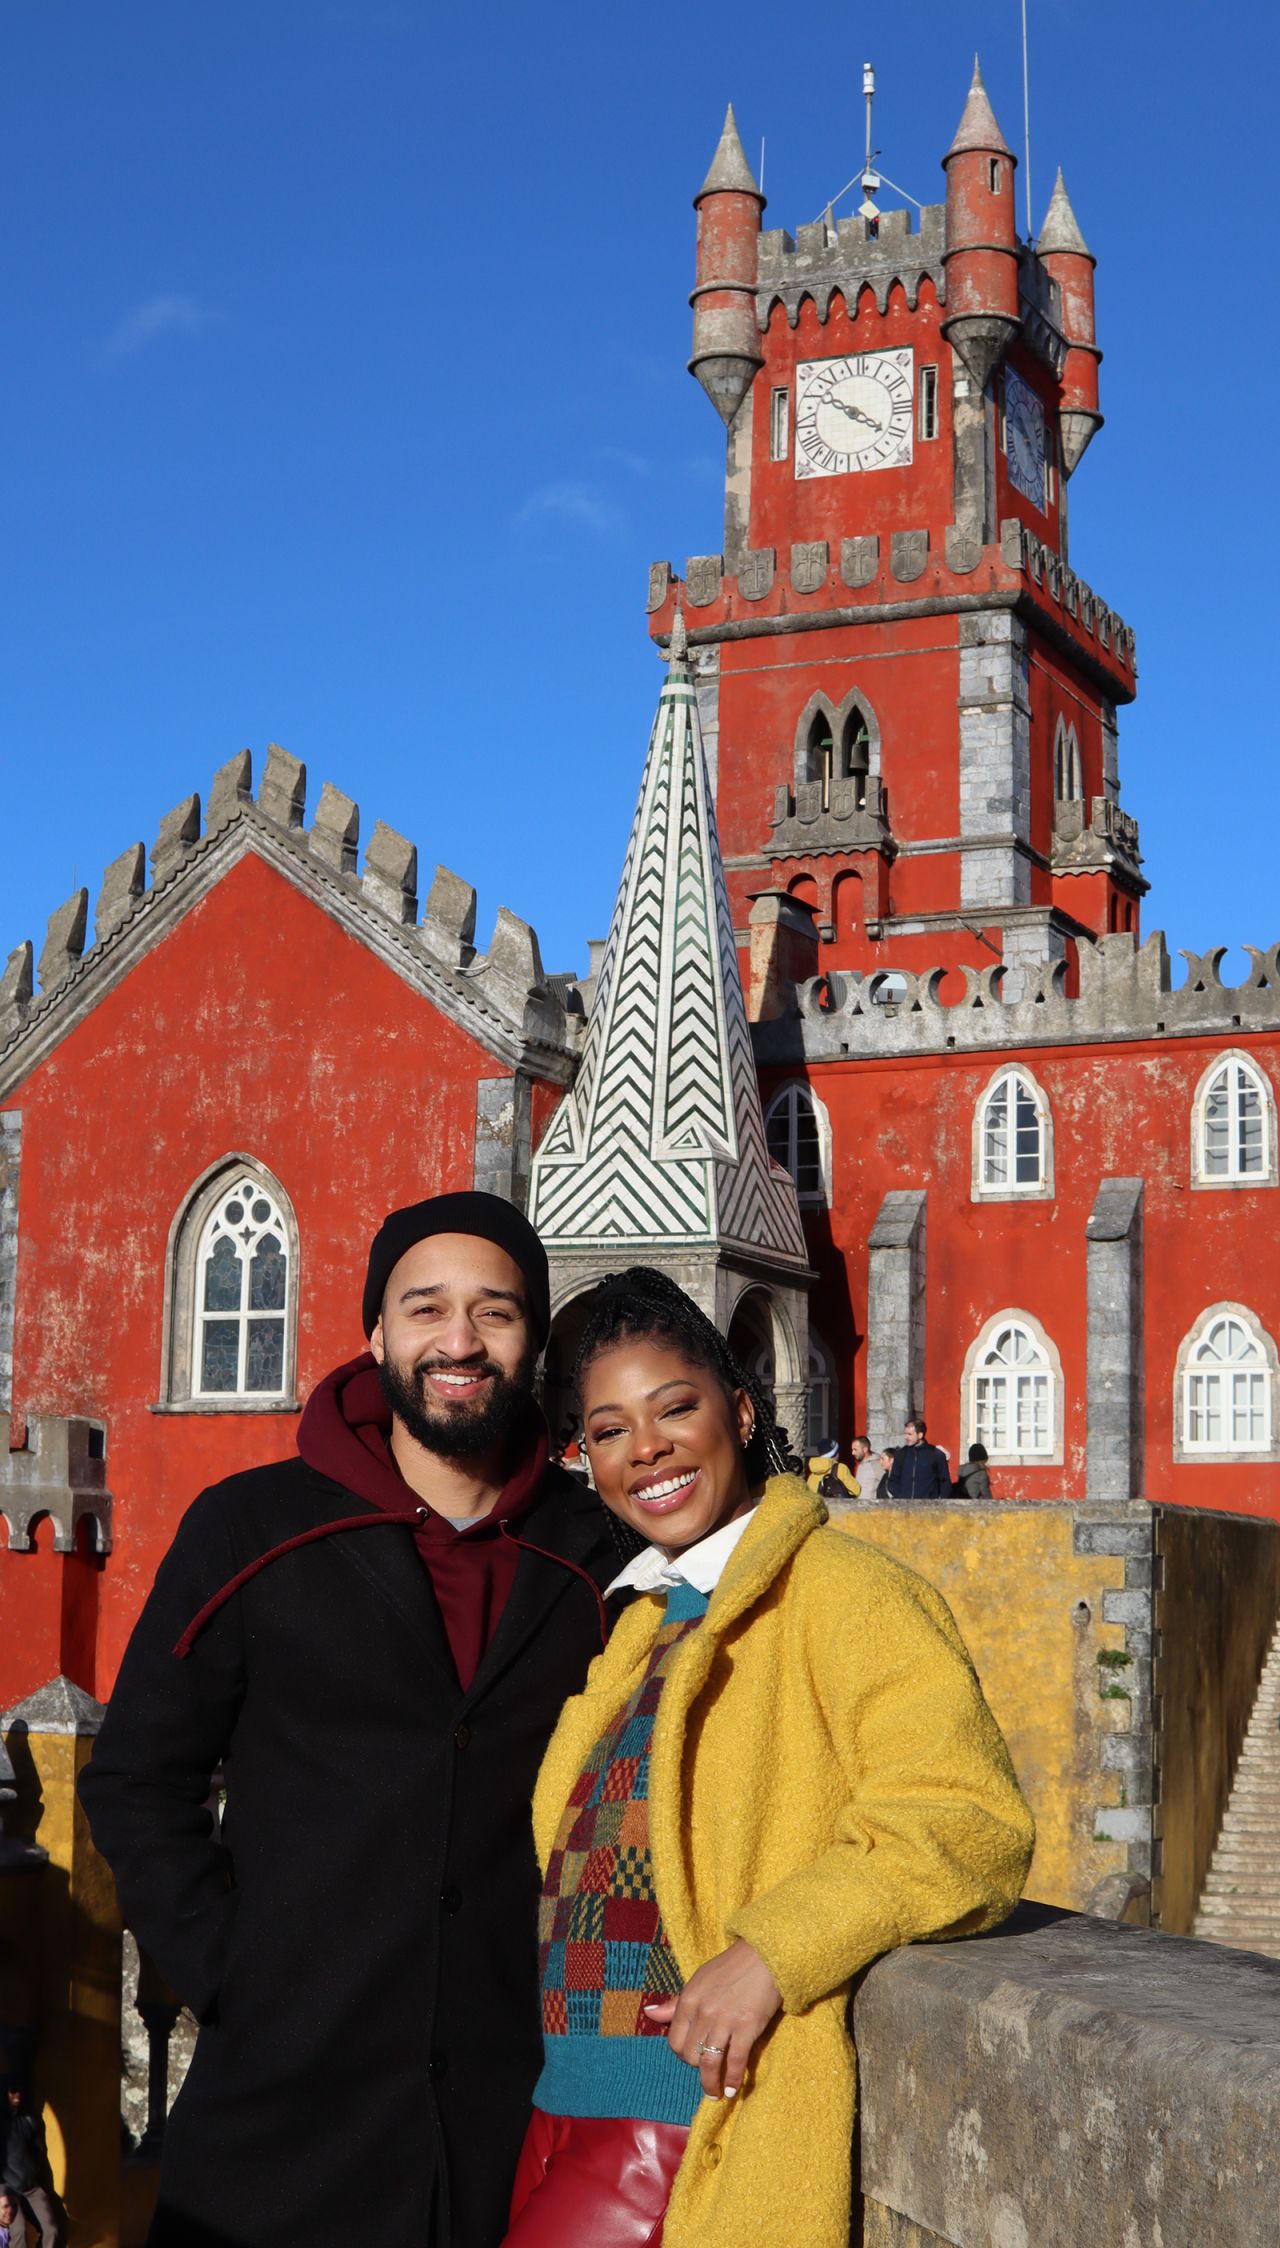 Here's Michael and Isis on vacation in Sintra, Portugal.